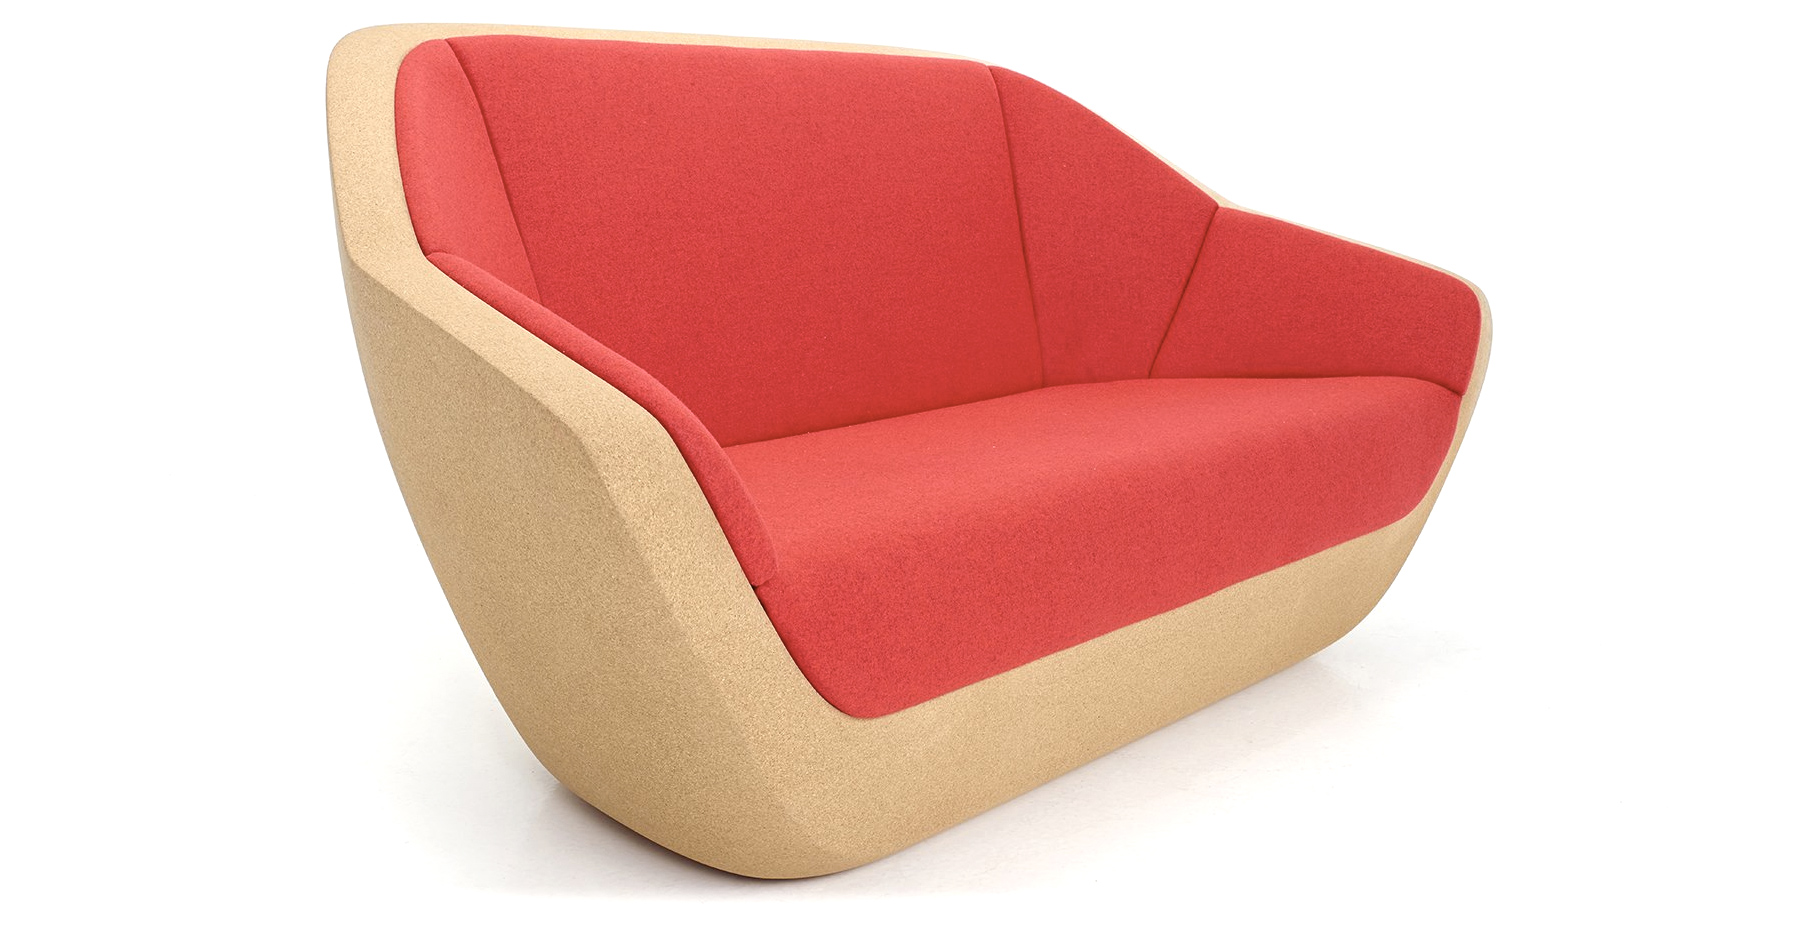 A Lightweight Cork Sofa Means You’ll Never Hire A Mover Again